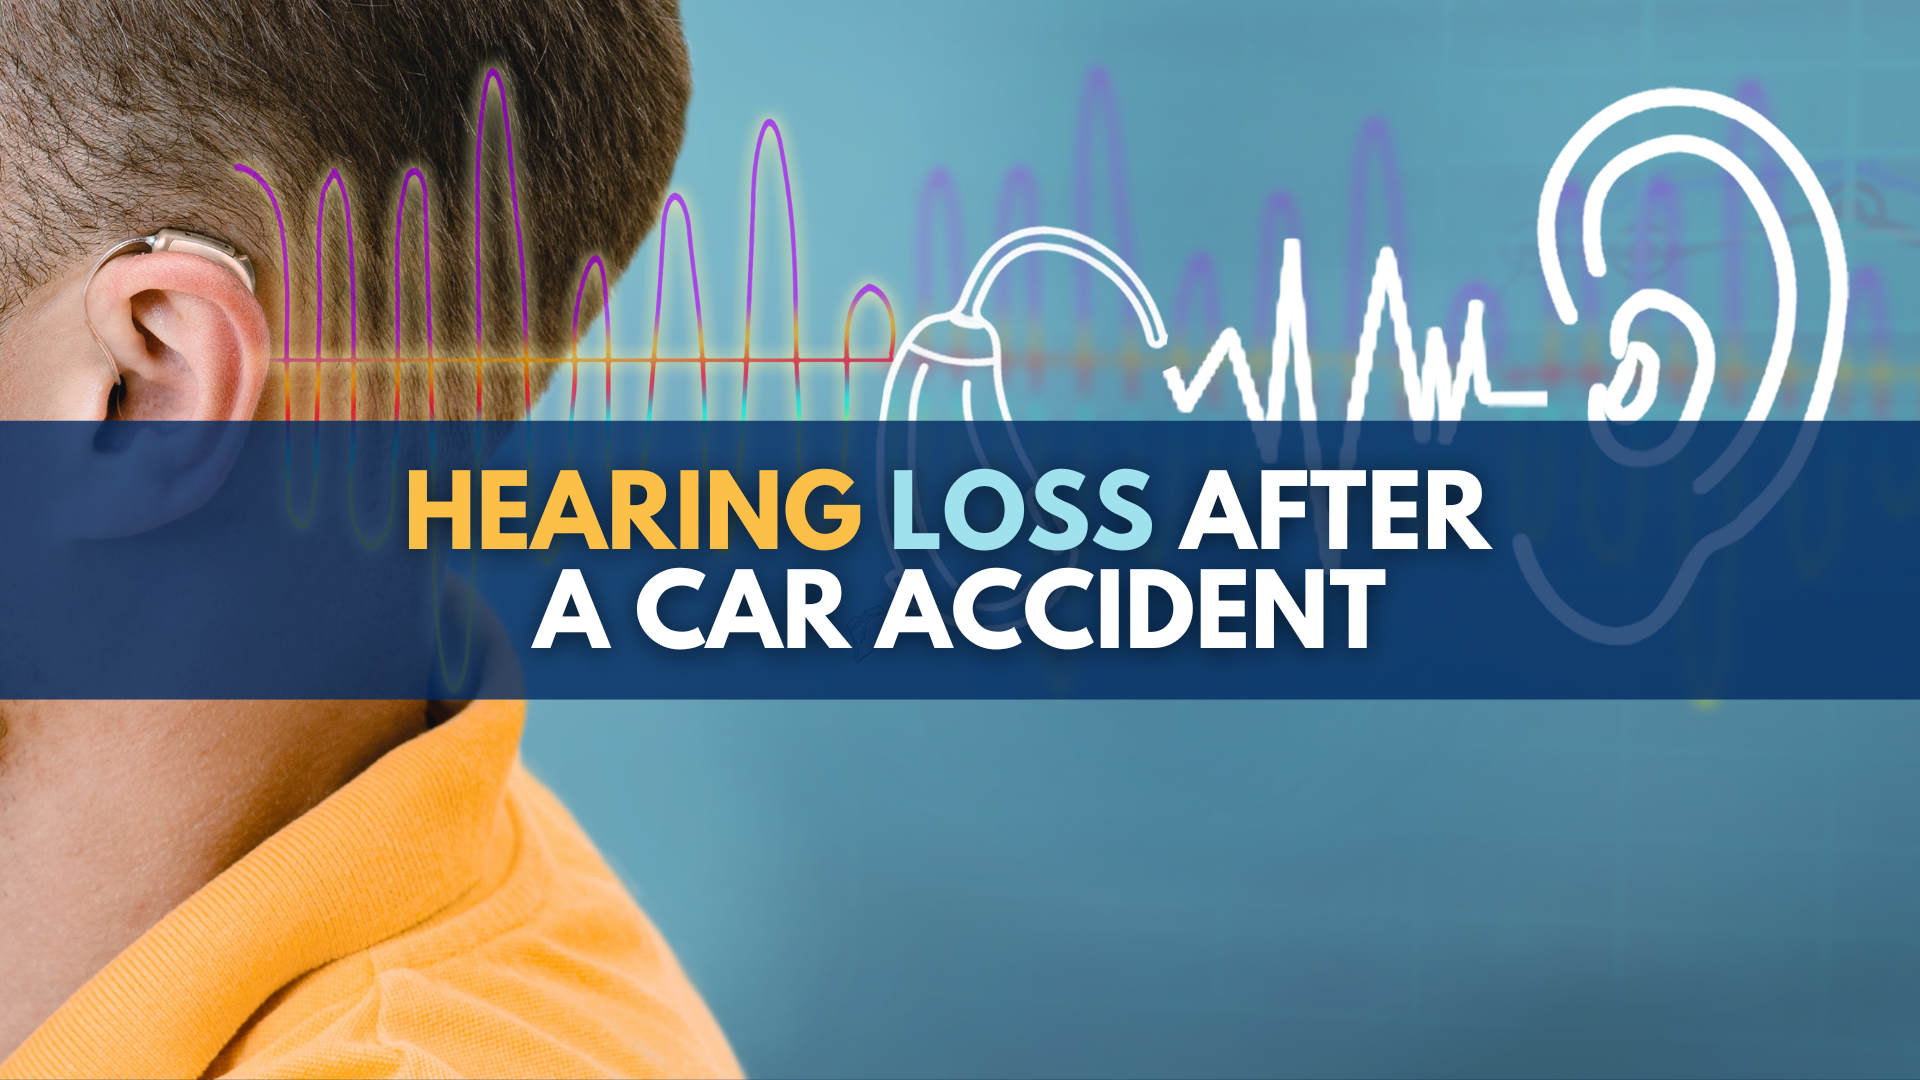 Hearing loss after a car accident